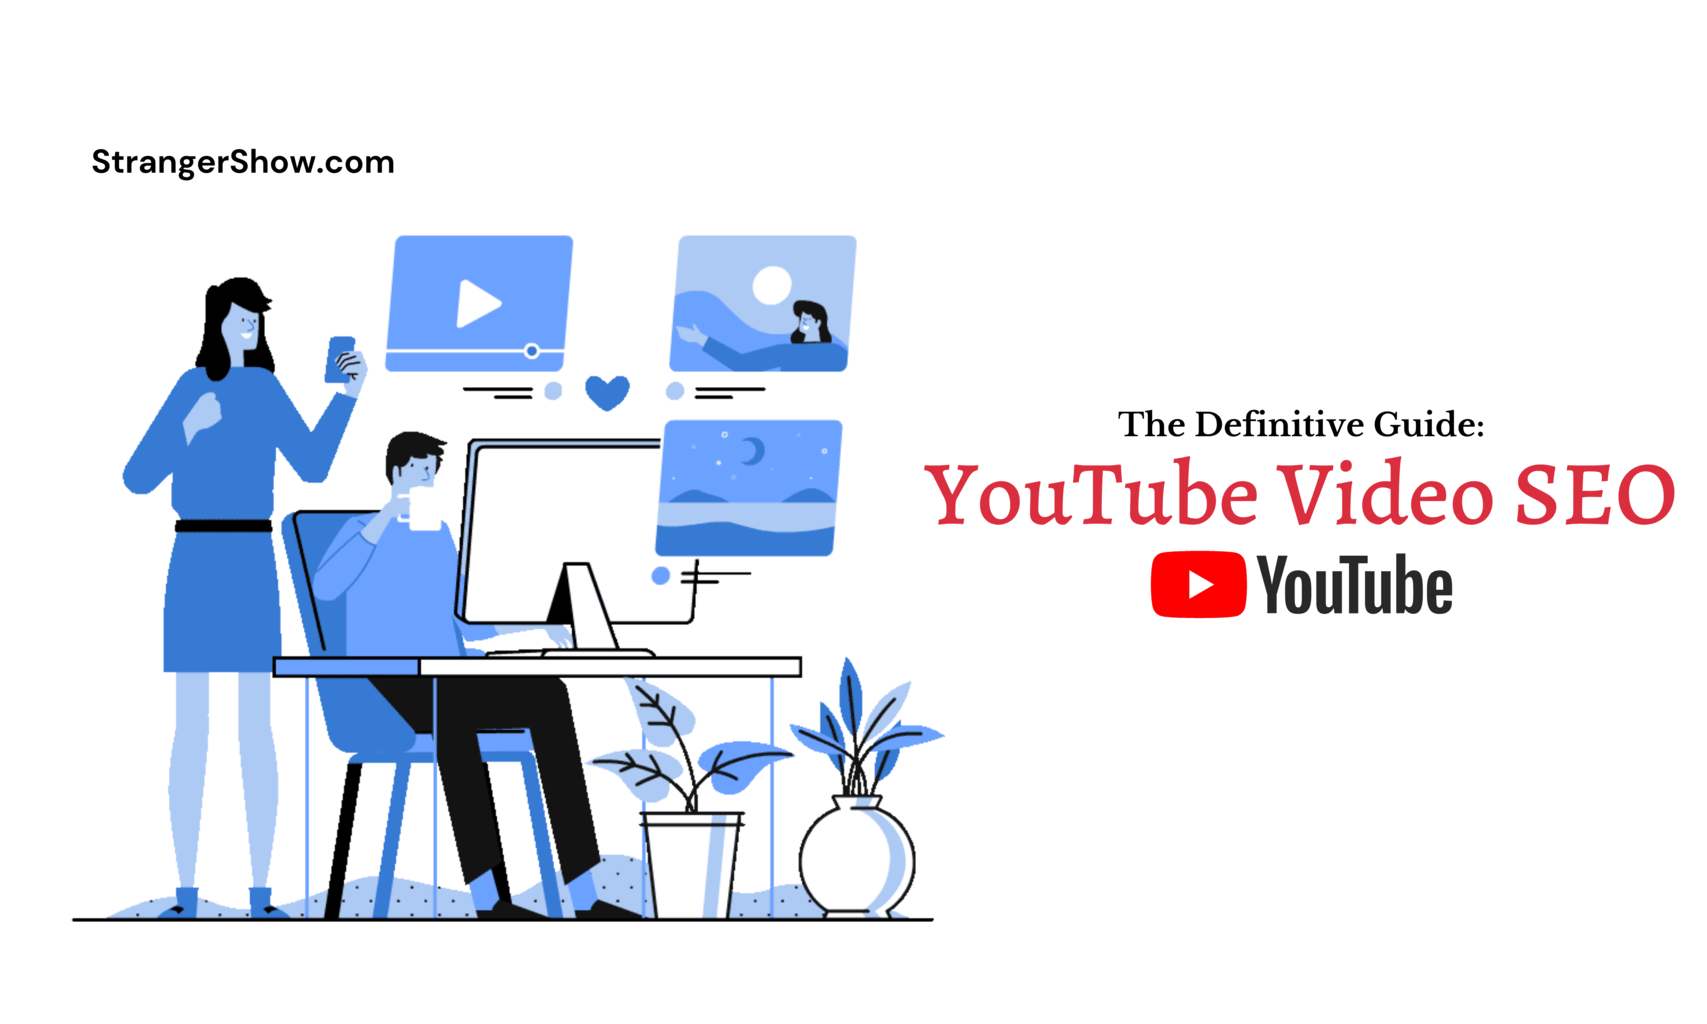 YouTube Video SEO: The Definitive Guide